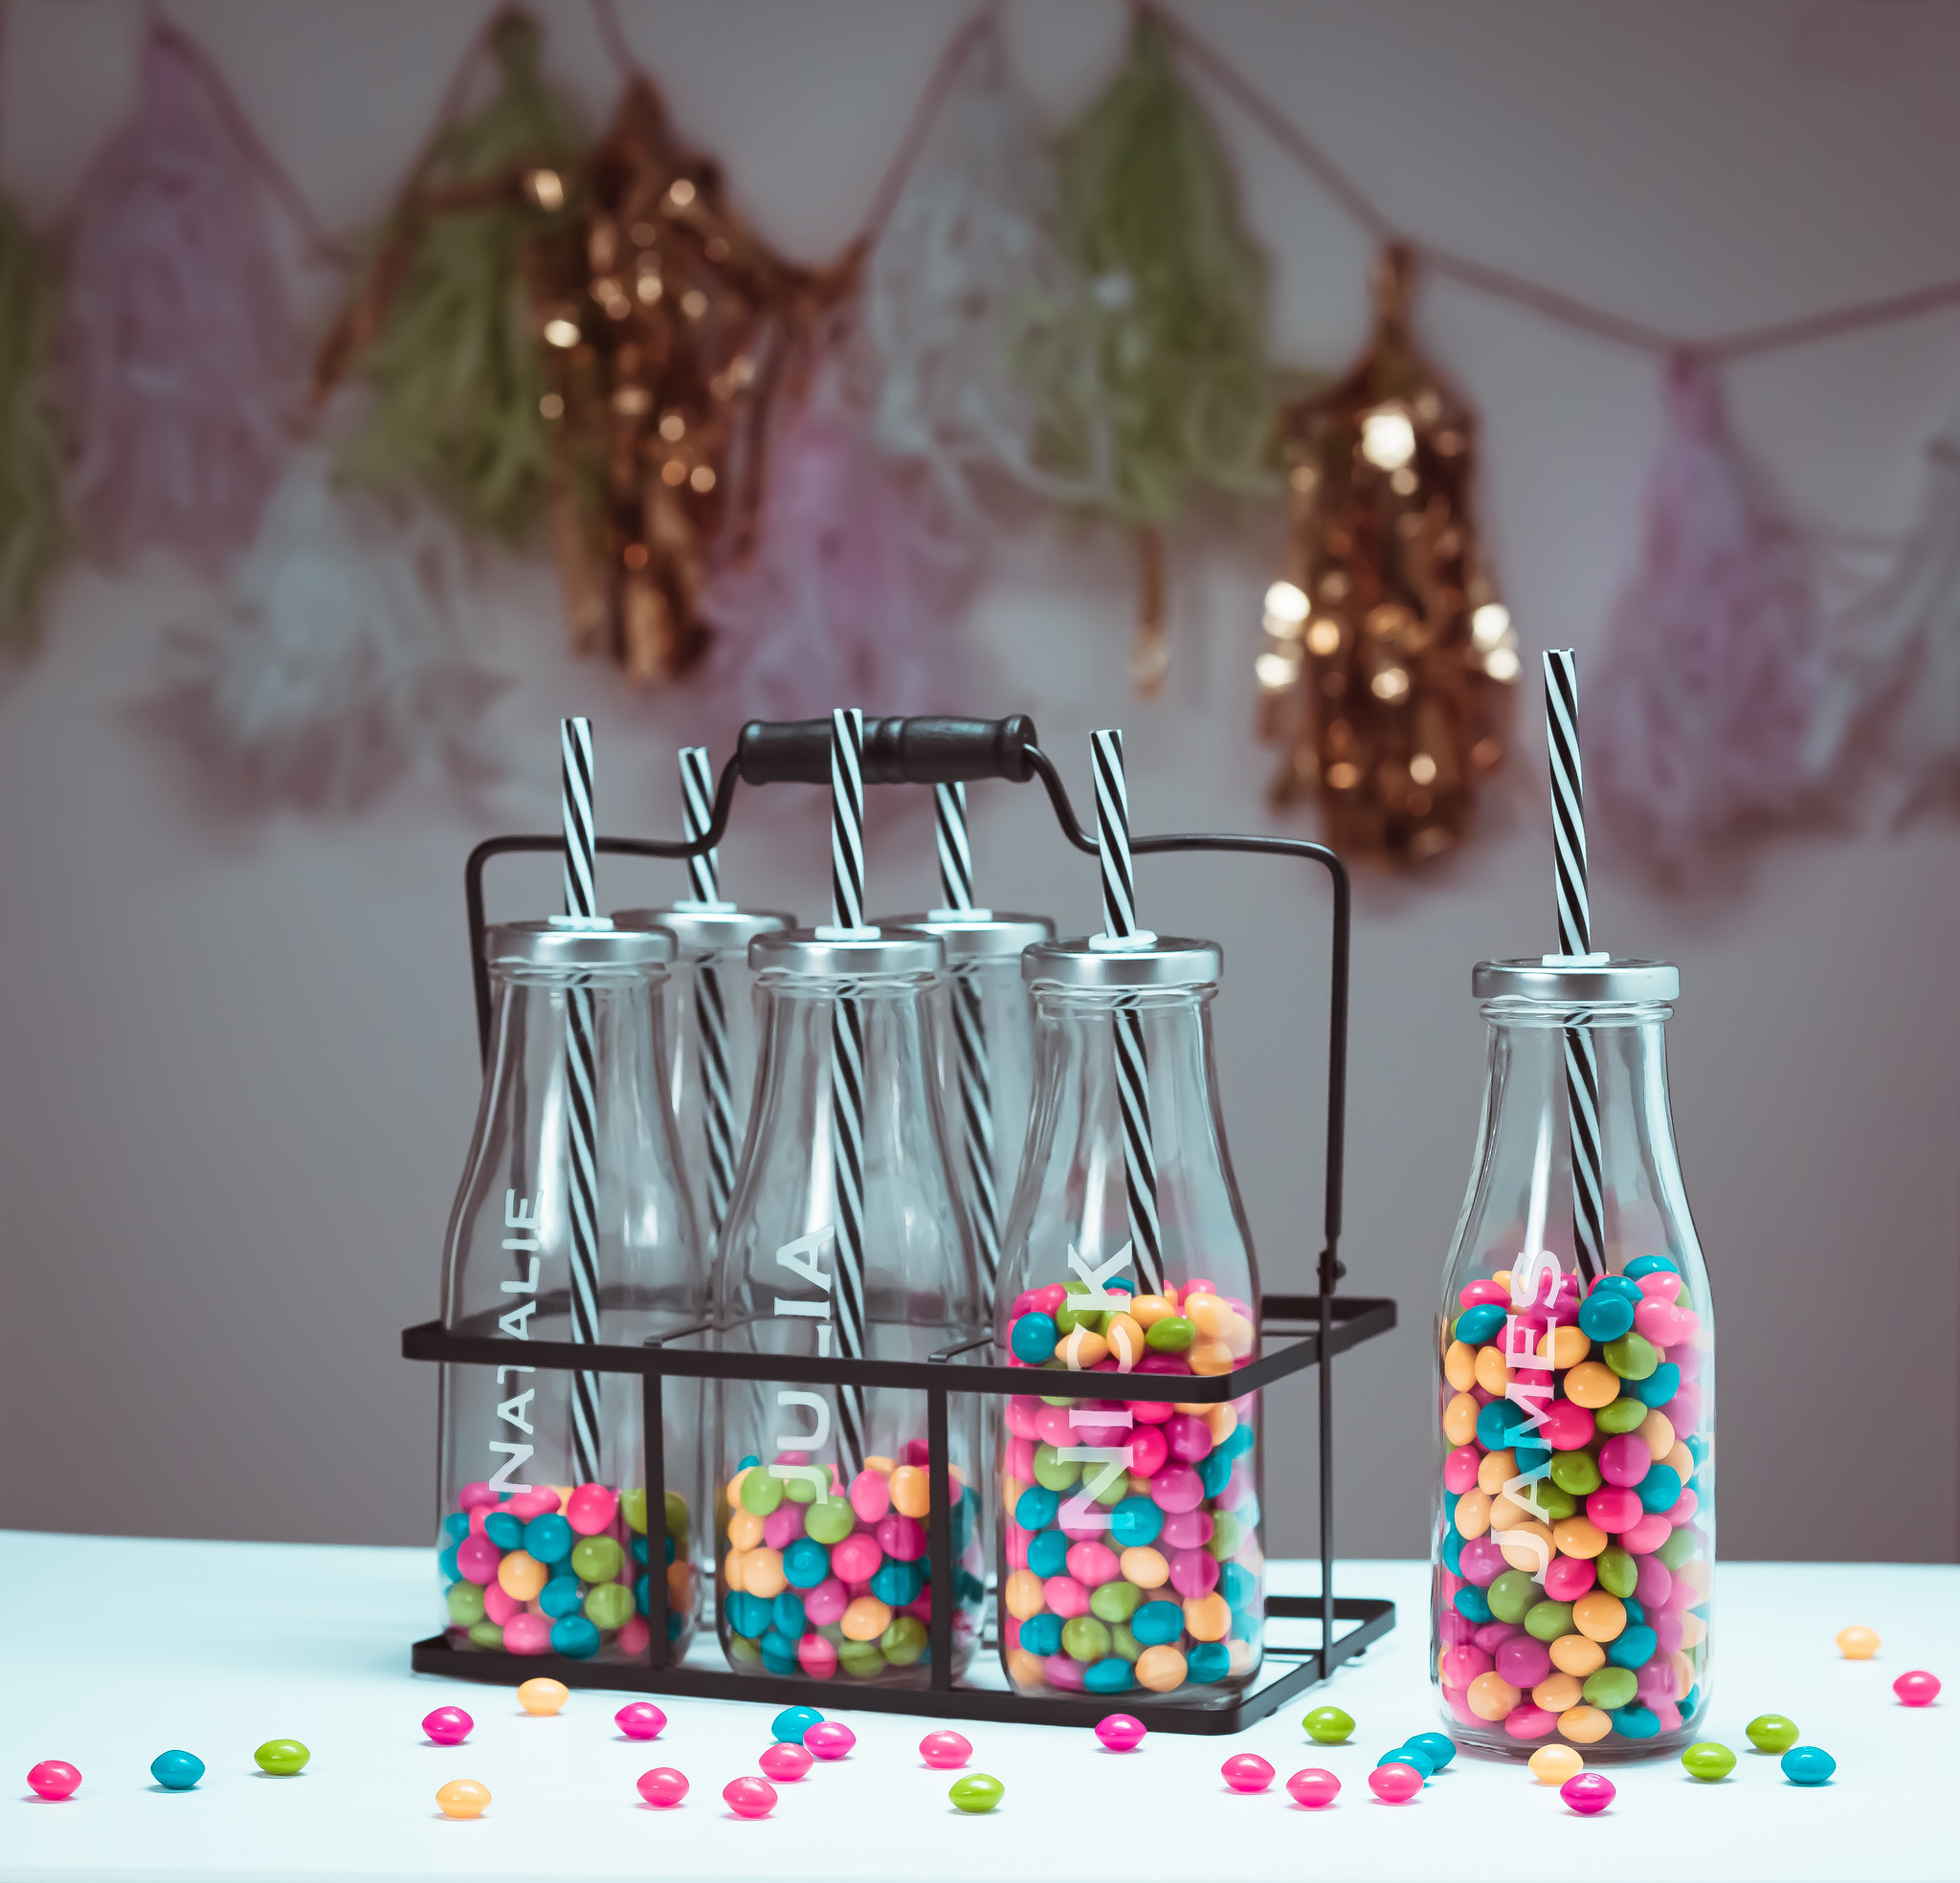 Personalized Milk Bottles - Great Christmas Gift